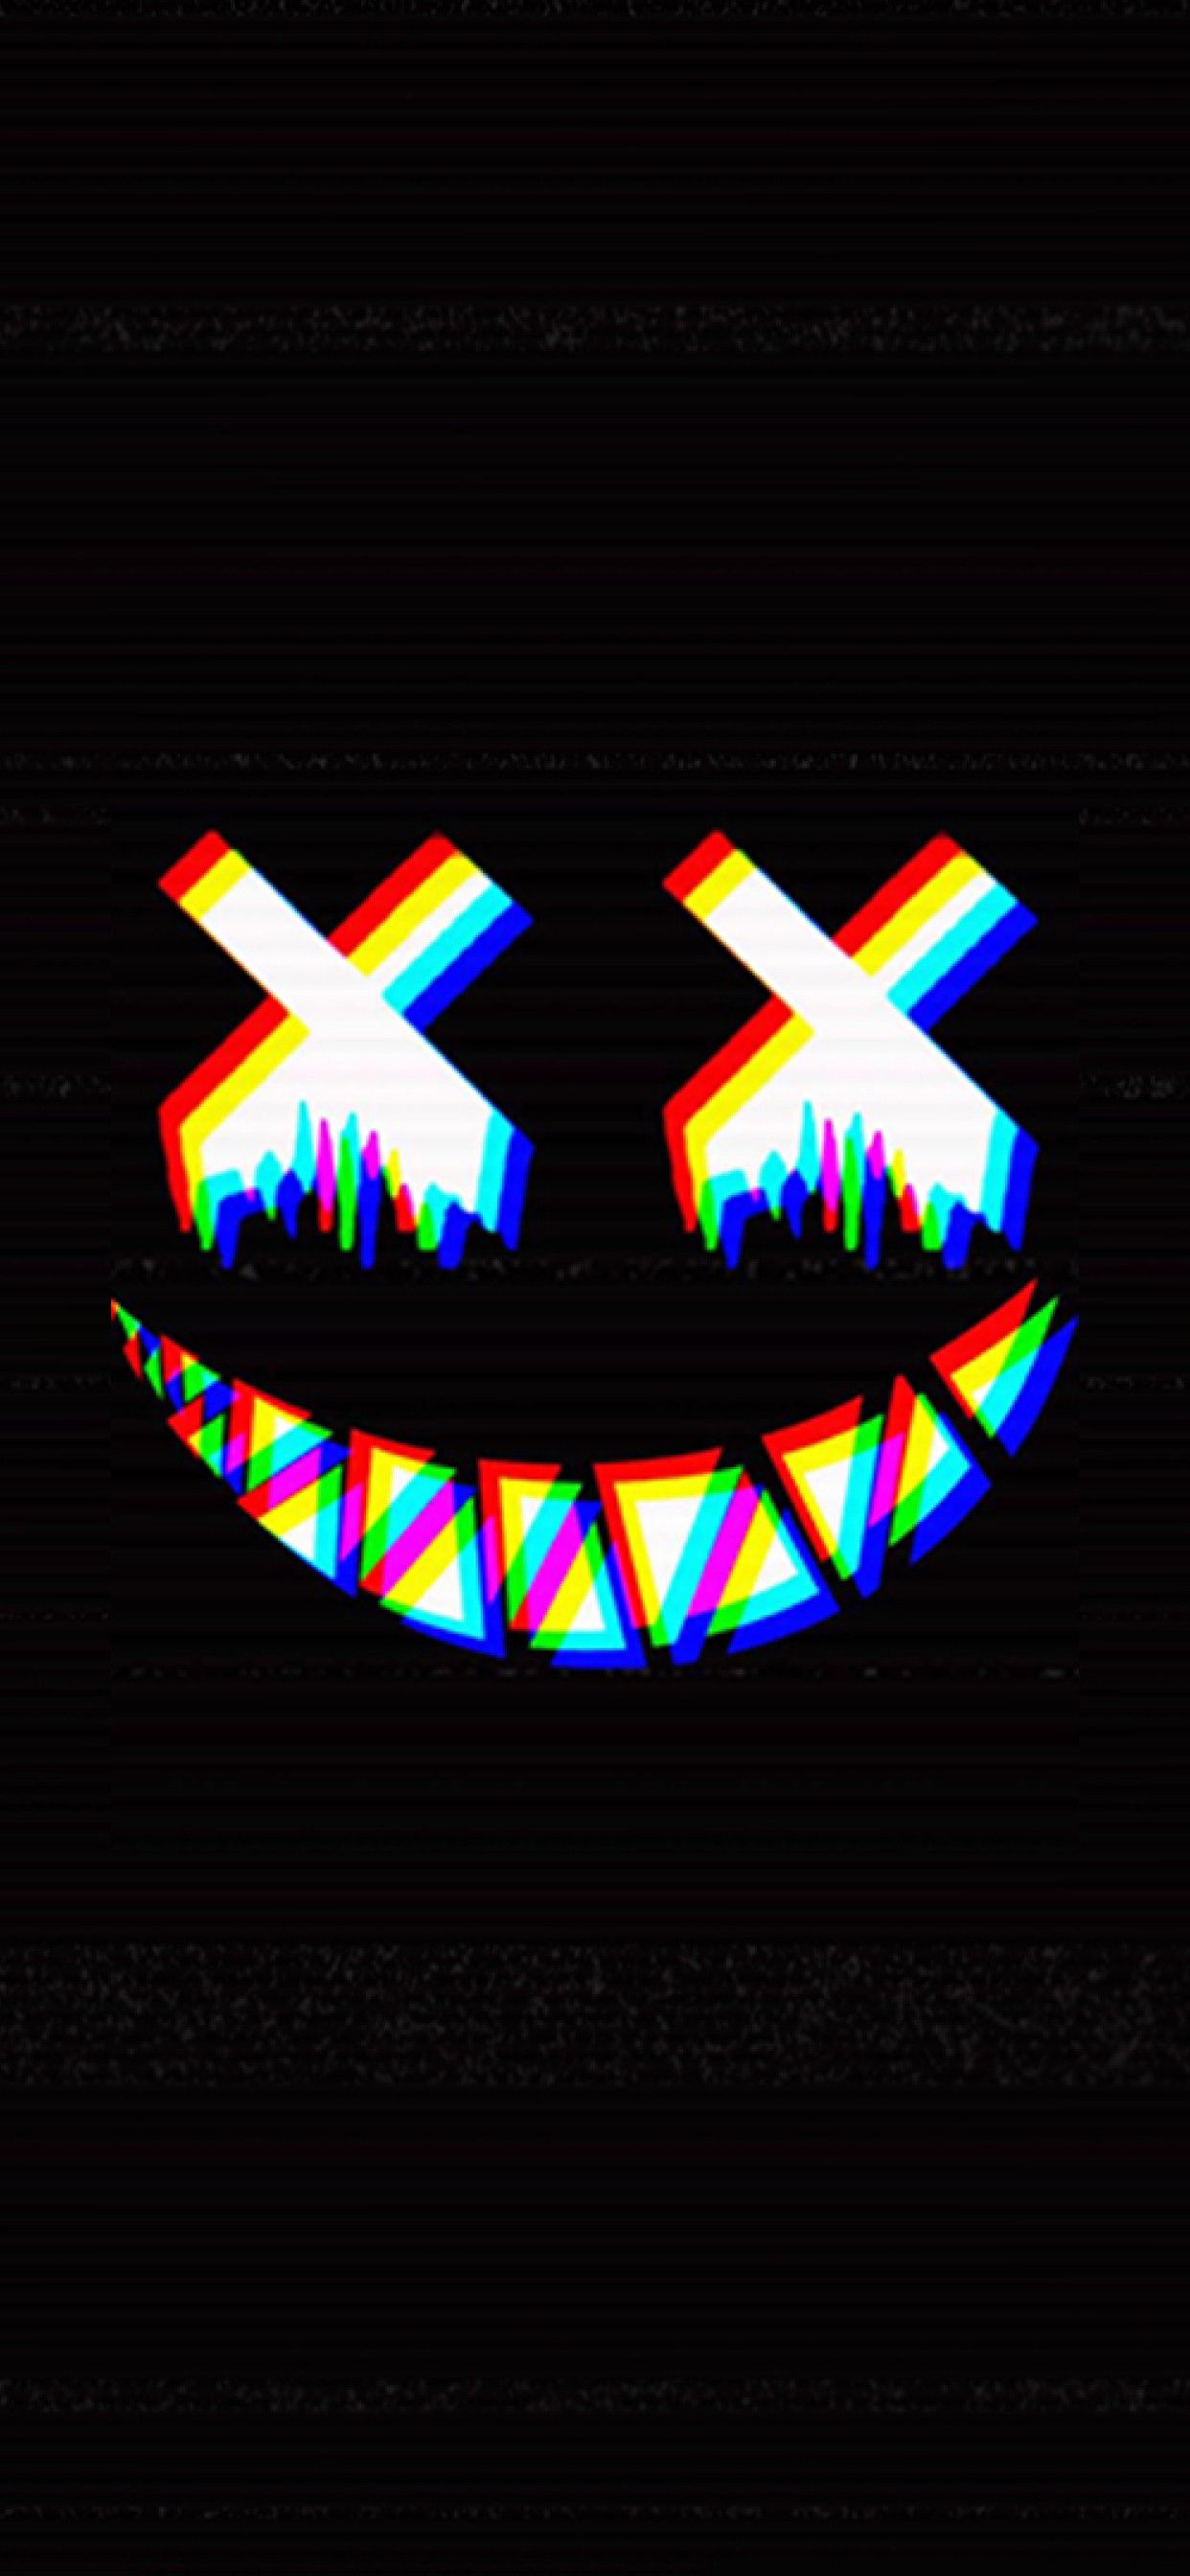 Creepy Glitched Art iPhone XS MAX Wallpaper, HD Artist 4K Wallpaper, Image, Photo and Background